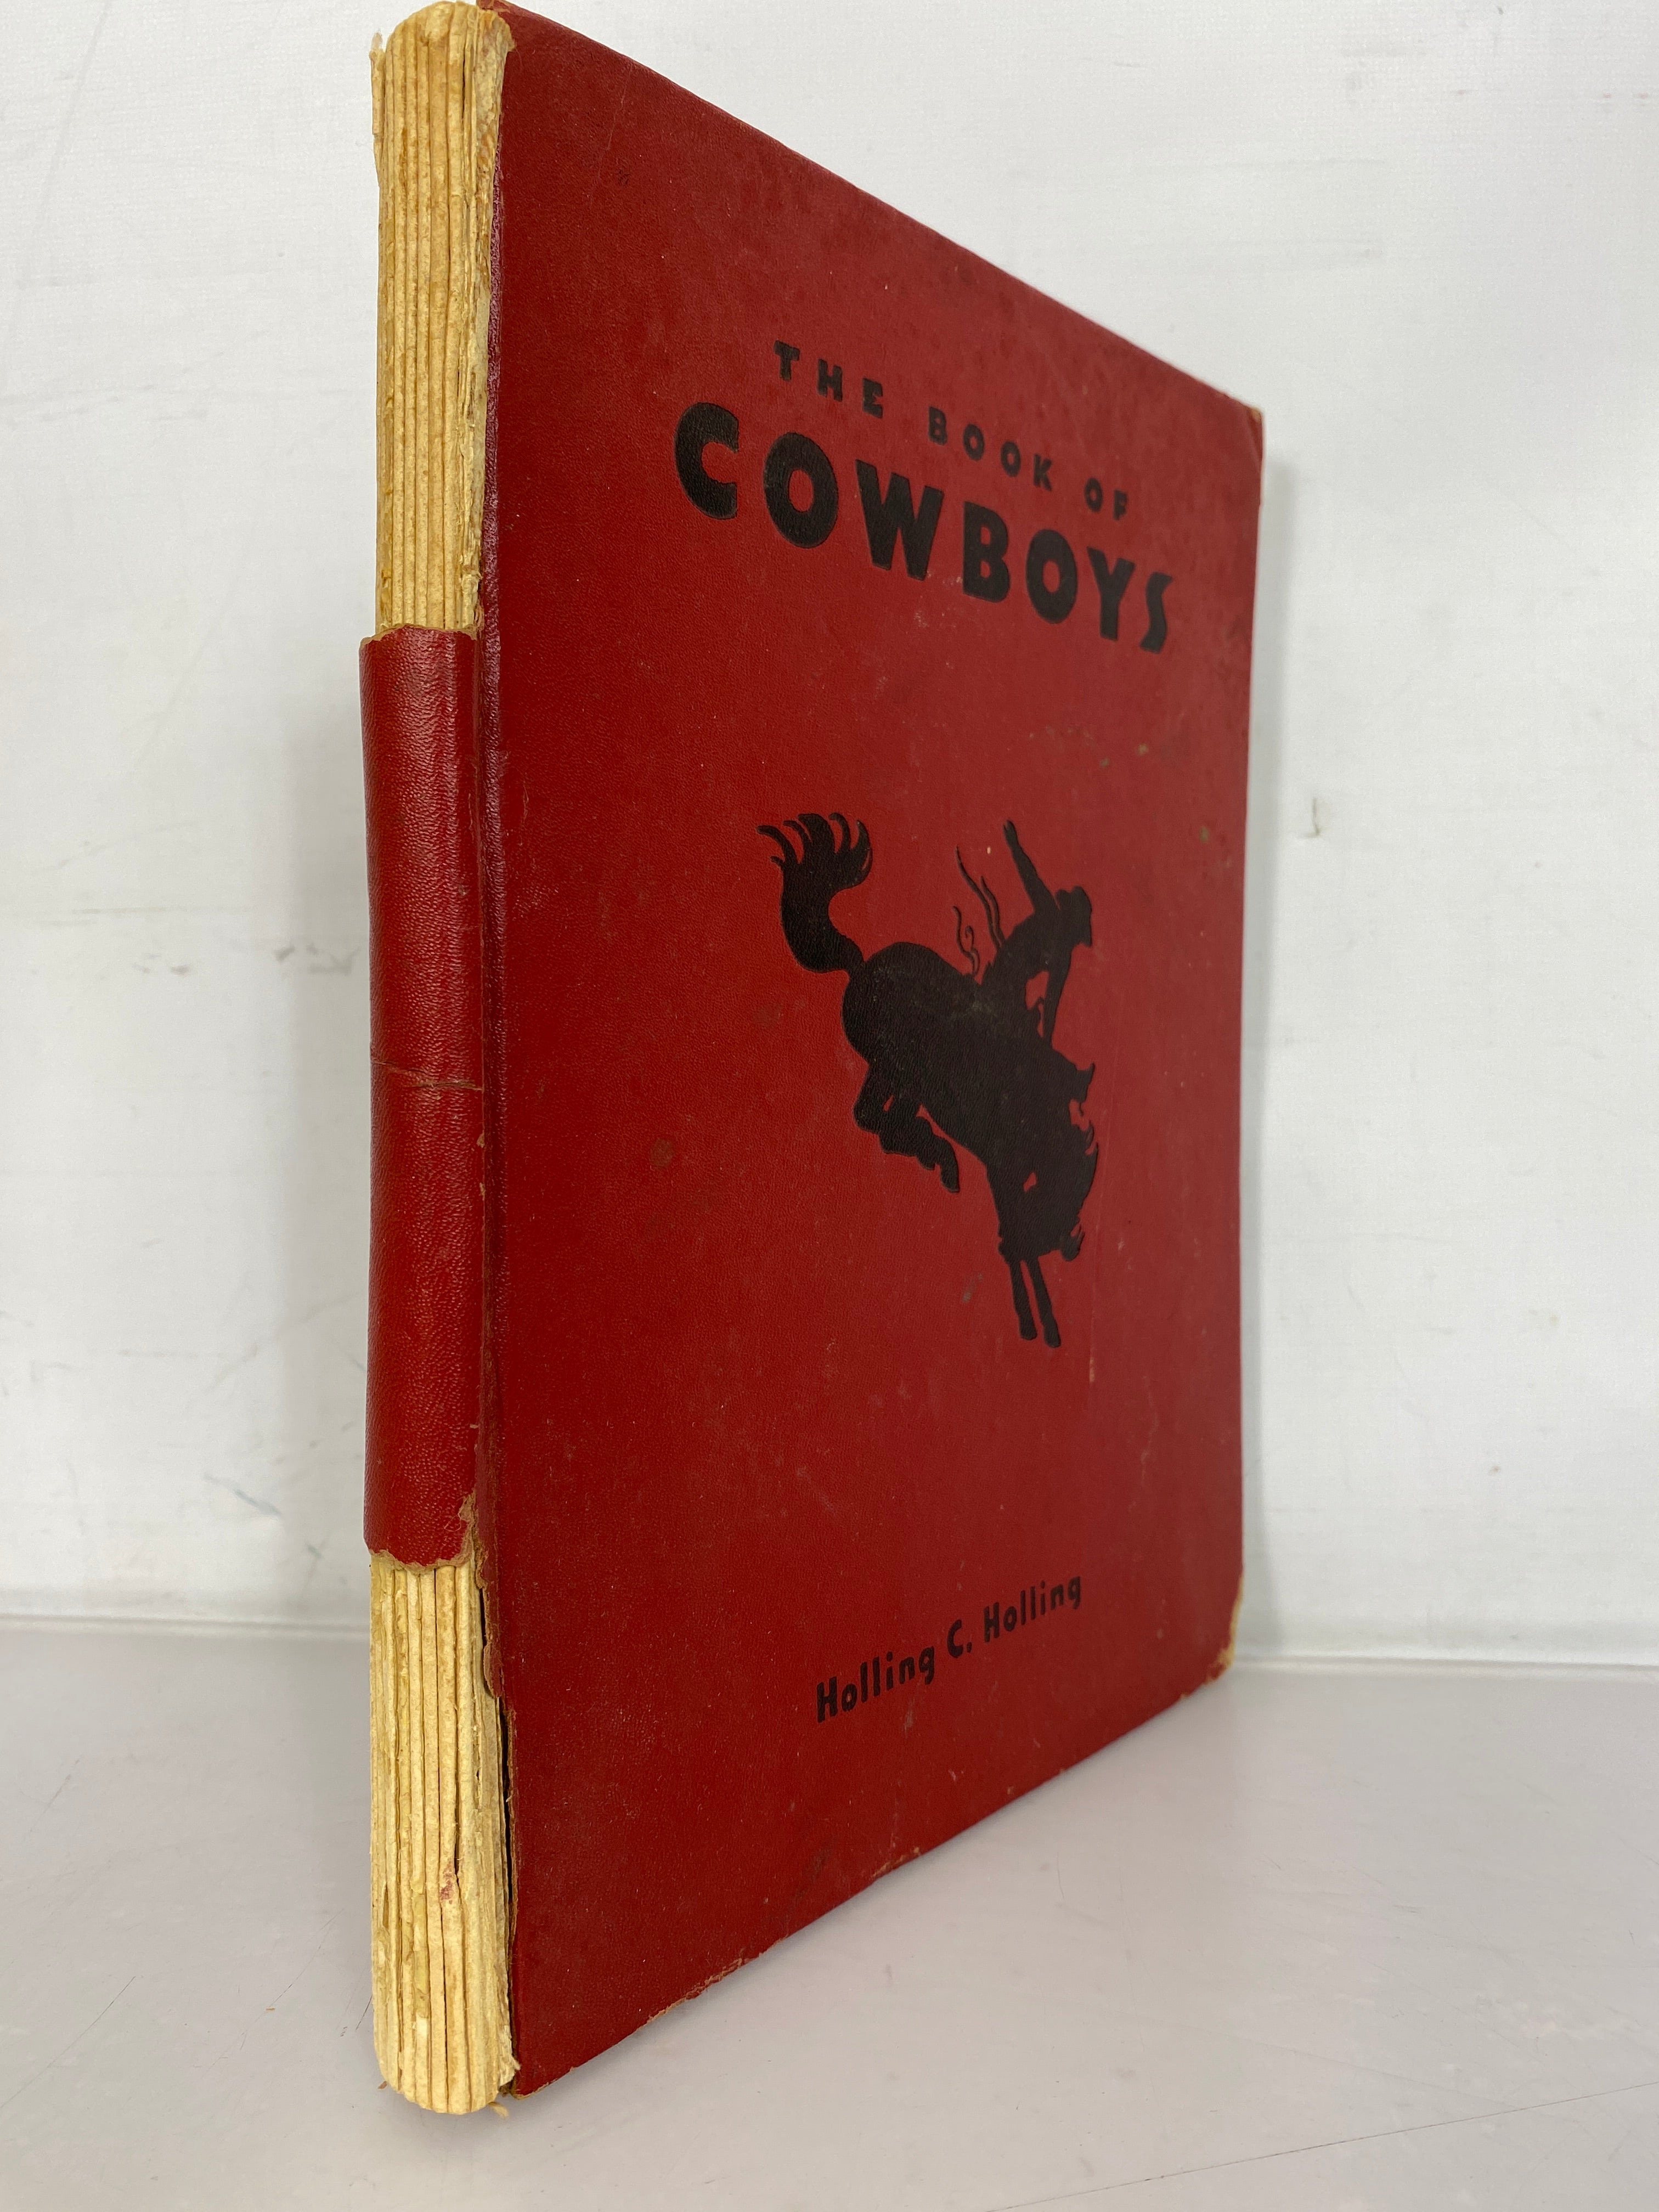 The Book of Cowboys by Holling C. Holling 1936 HC Vintage Children's Book